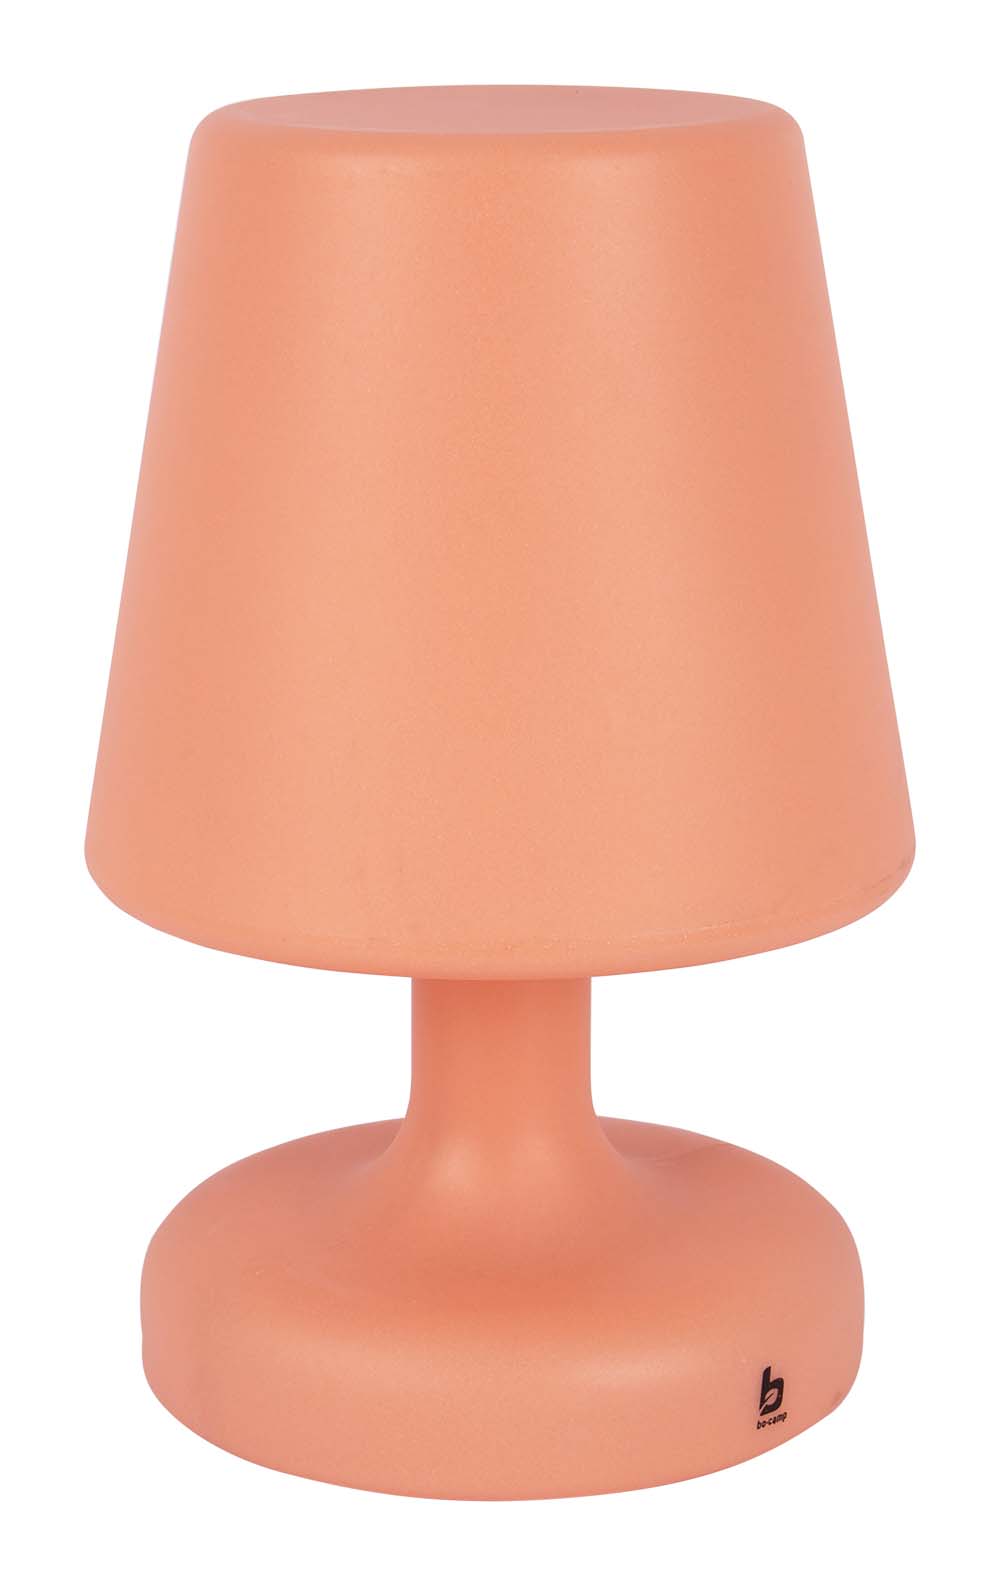 5818618 A modern and coloful table lamp from the Pastel collection. Gives a pleasant light through the LEDs with a warm light color and the matte shade. The lamp can be used in three light modes: 20%, 50% and 100%.  The battery is rechargeable through USB.